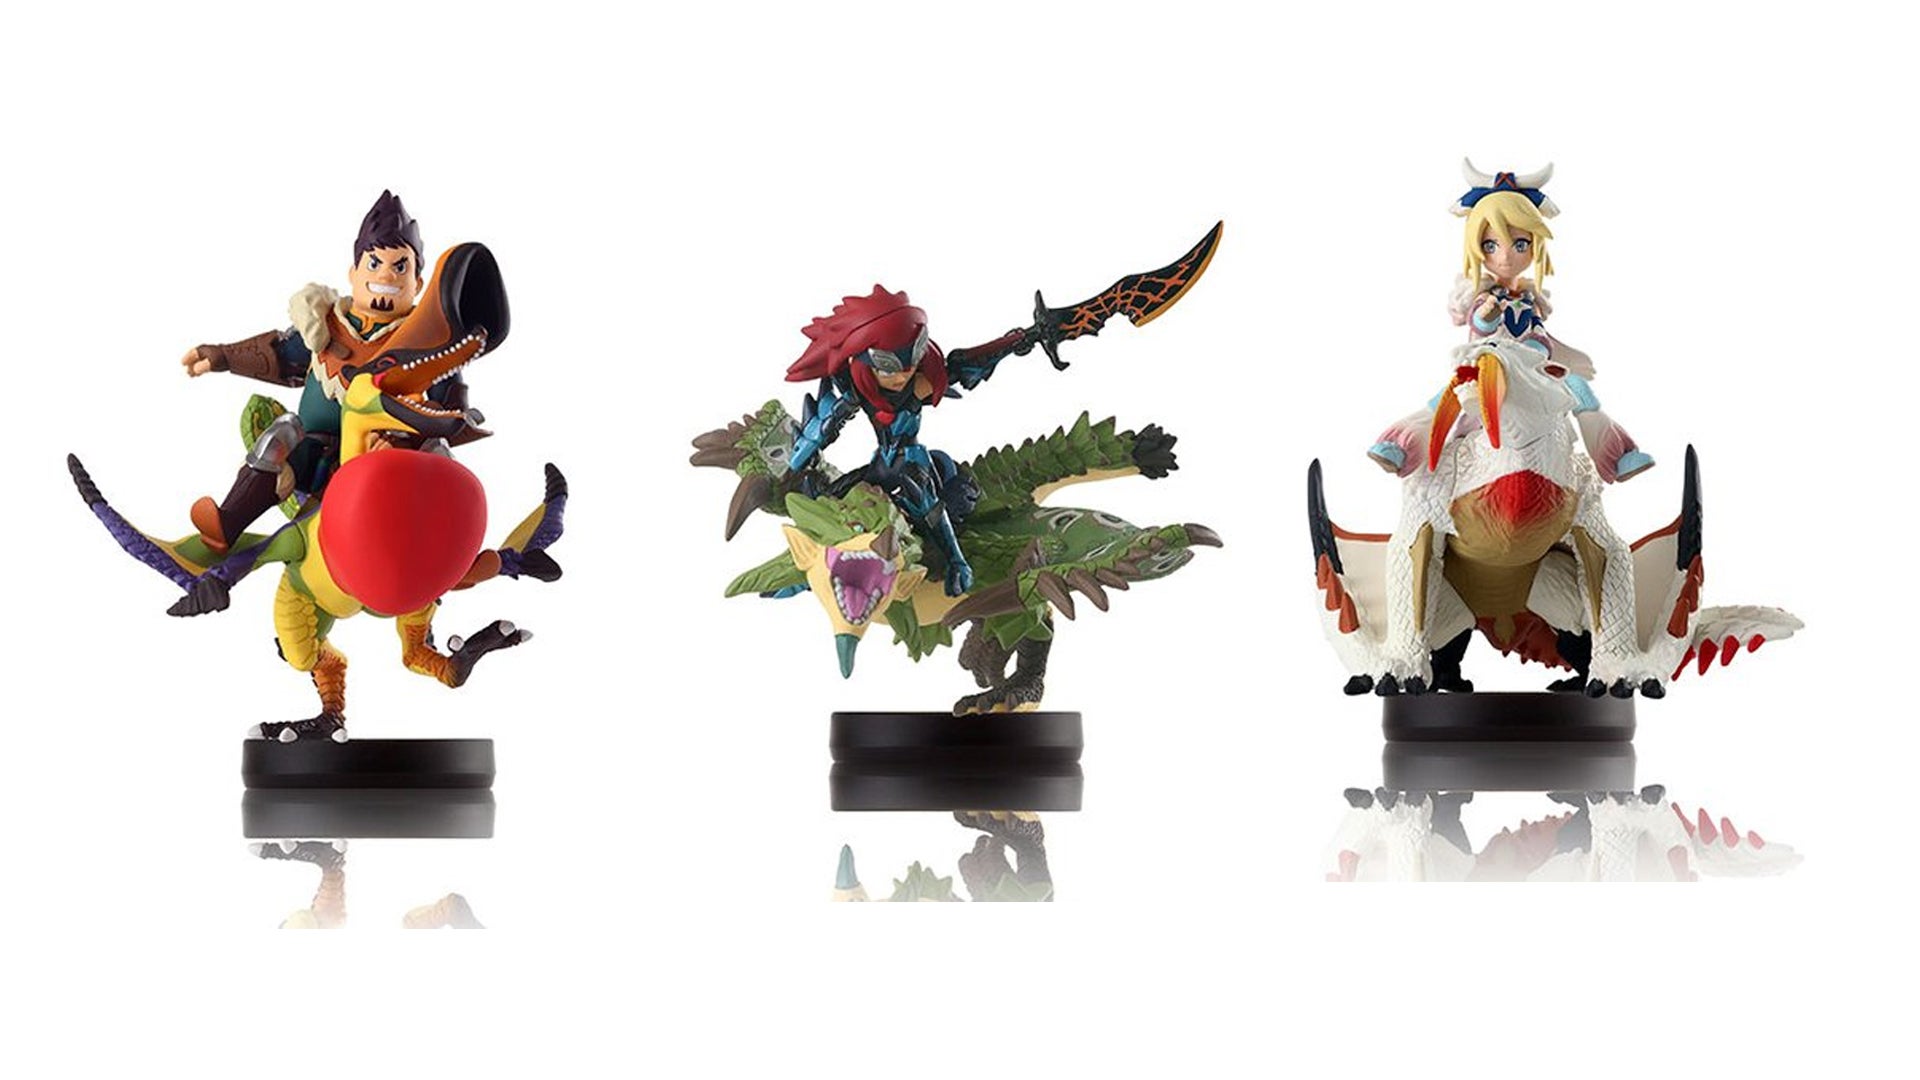 Image for Japan-Only Monster Hunter Amiibo on Sale at Play-Asia for $9.99 Each